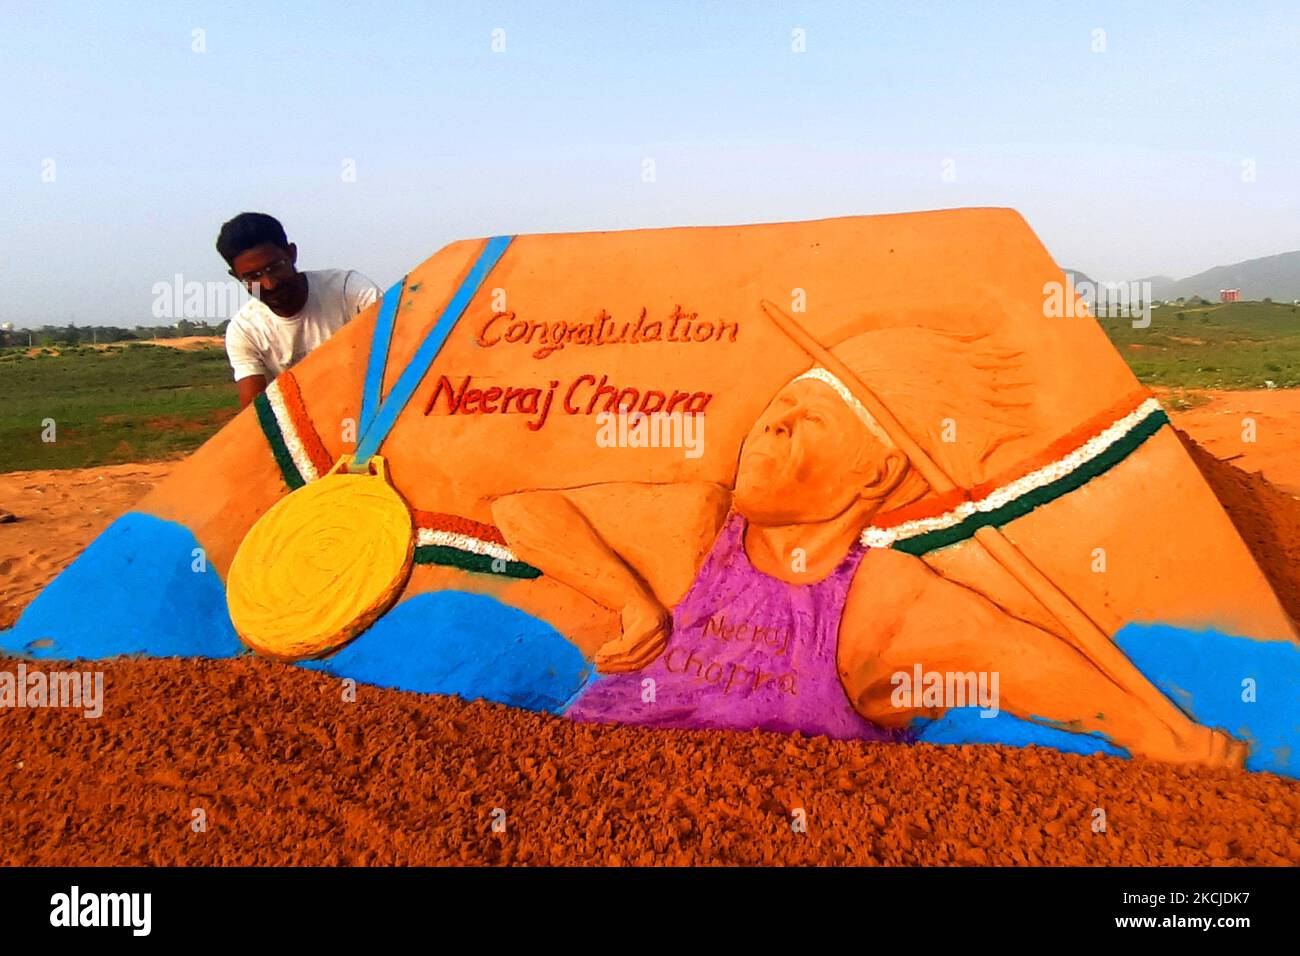 Sand Artist Ajay Rawat Create a sand sculpture to Congratulate ''Neeraj Chopra'' for winning the Gold Medal in Tokyo Olympics 2020, in Desert of Pushkar, Rajasthan, India on 08 August 2021. (Photo by Himanshu Sharma/NurPhoto) Stock Photo